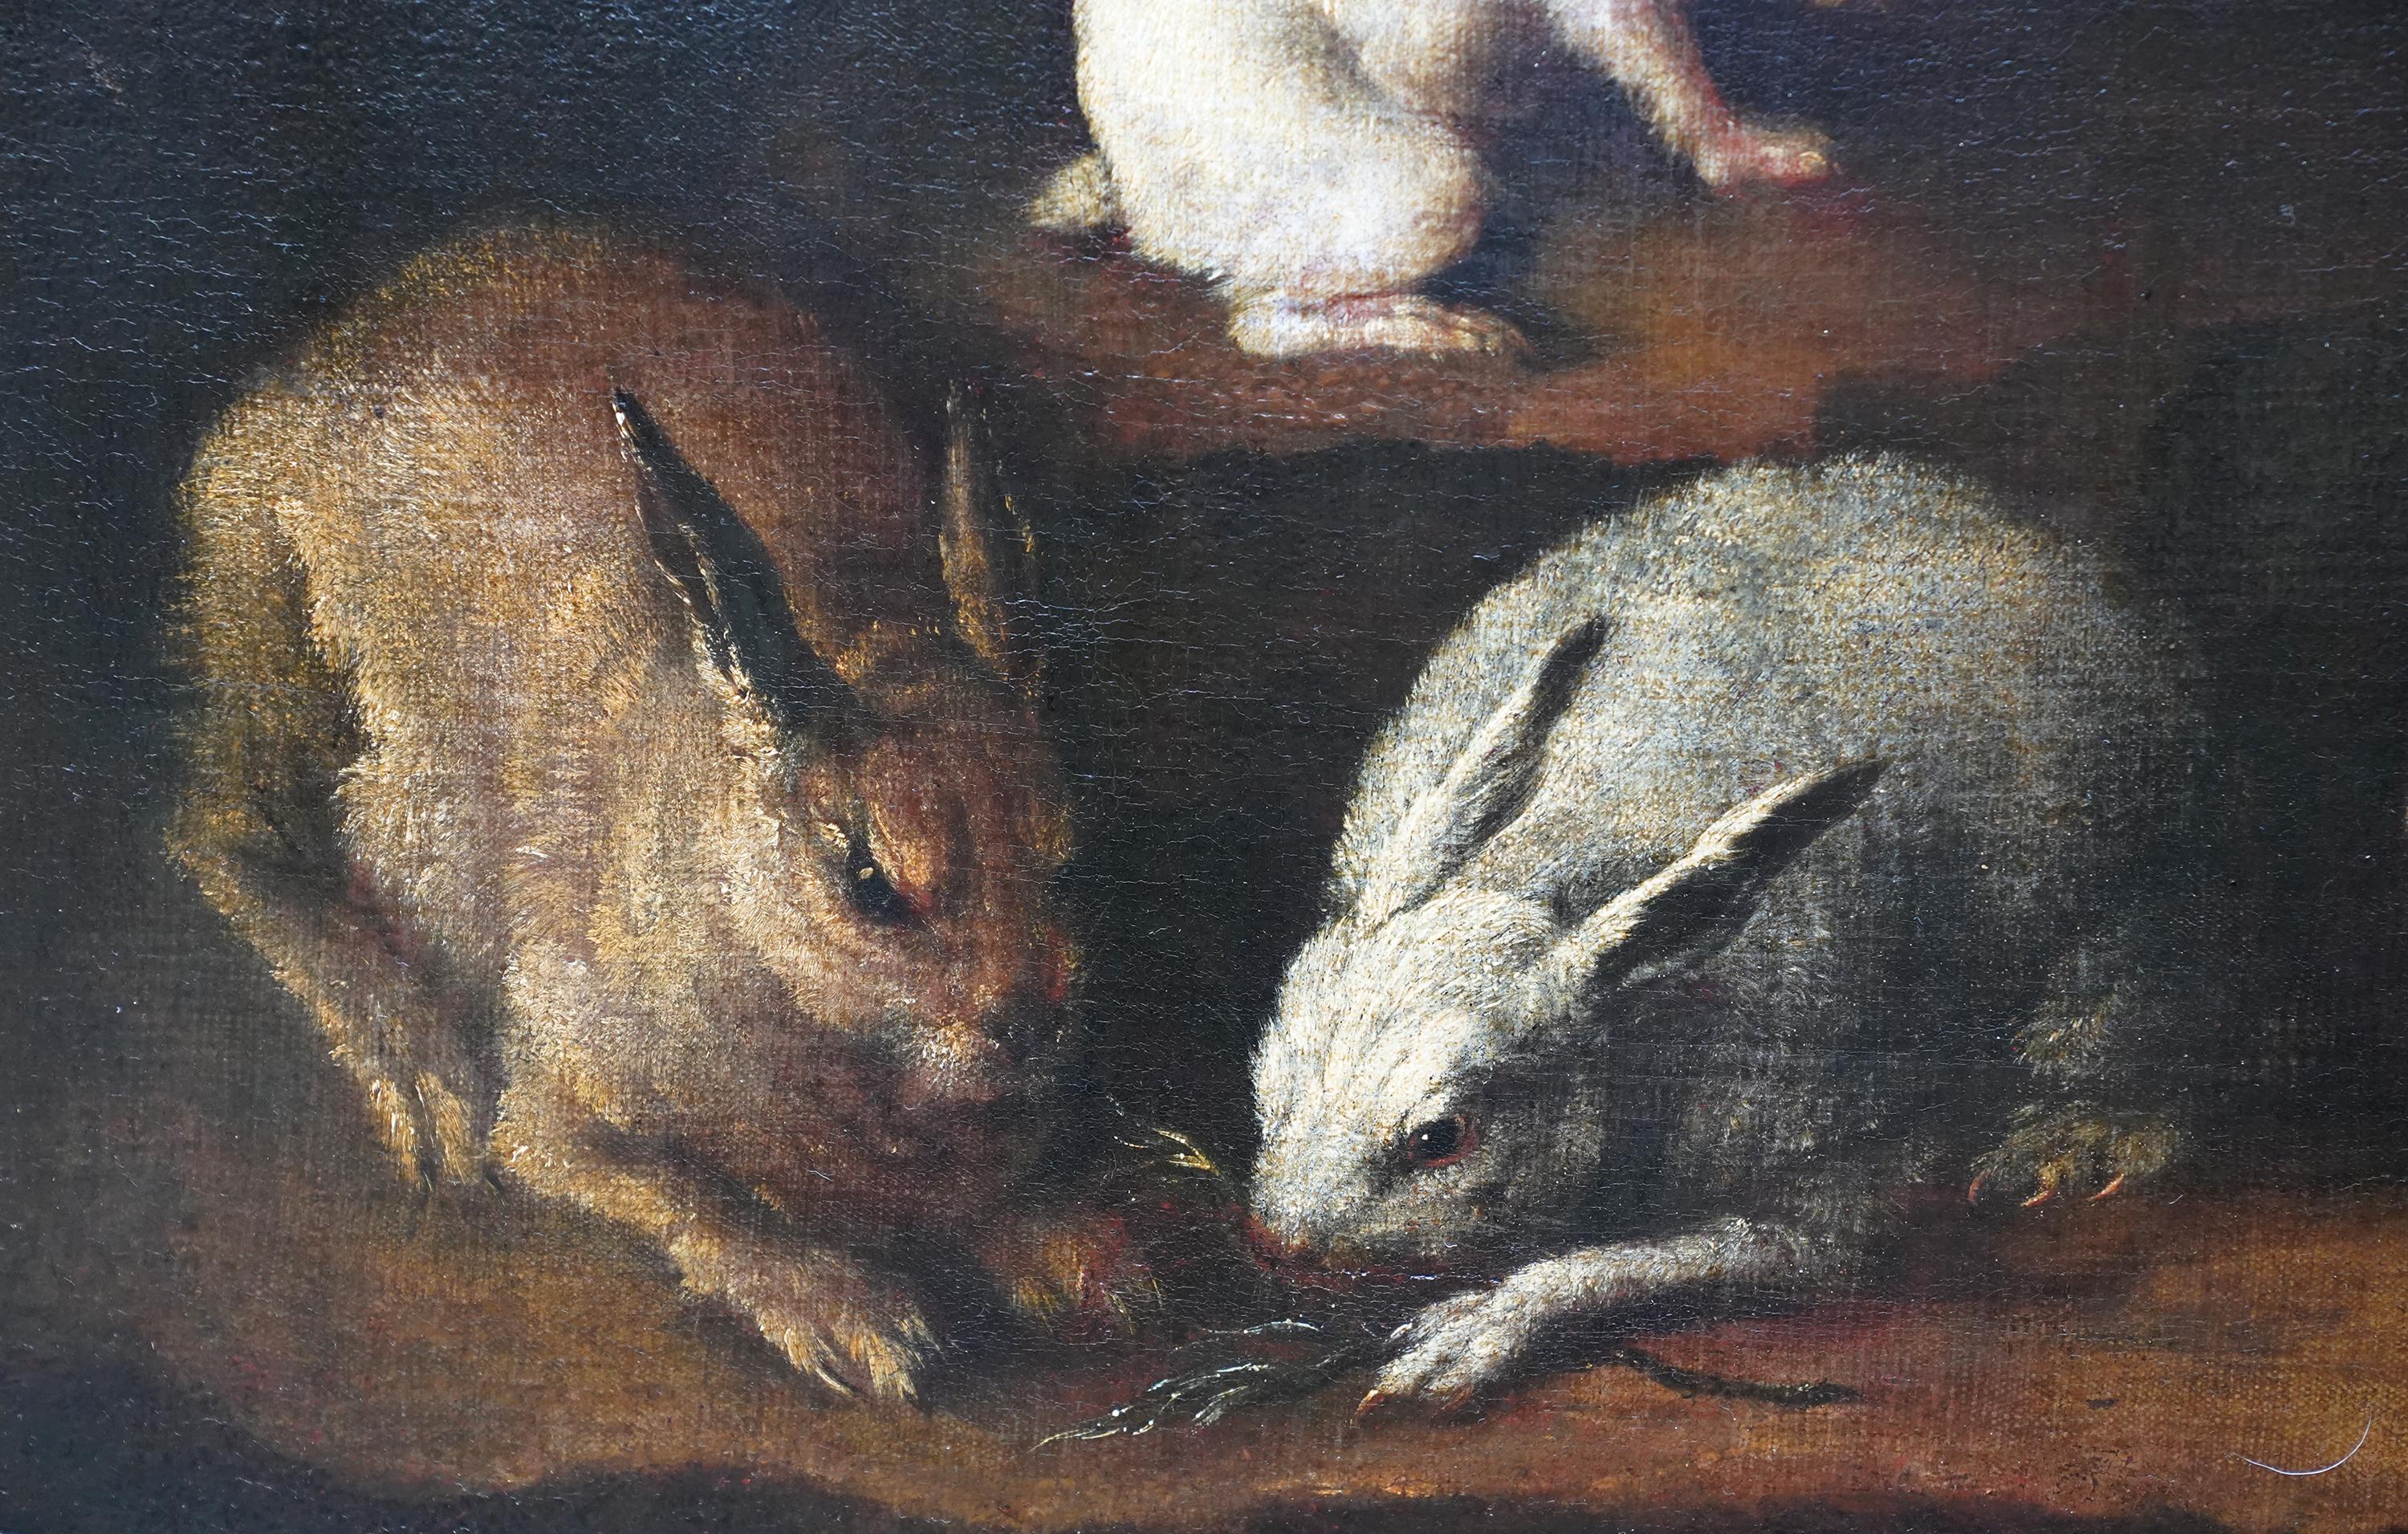 Rabbits Dove and Guinea Pig in an Interior - Italian Old master art oil painting - Painting by Giovanni Agostino Cassana 